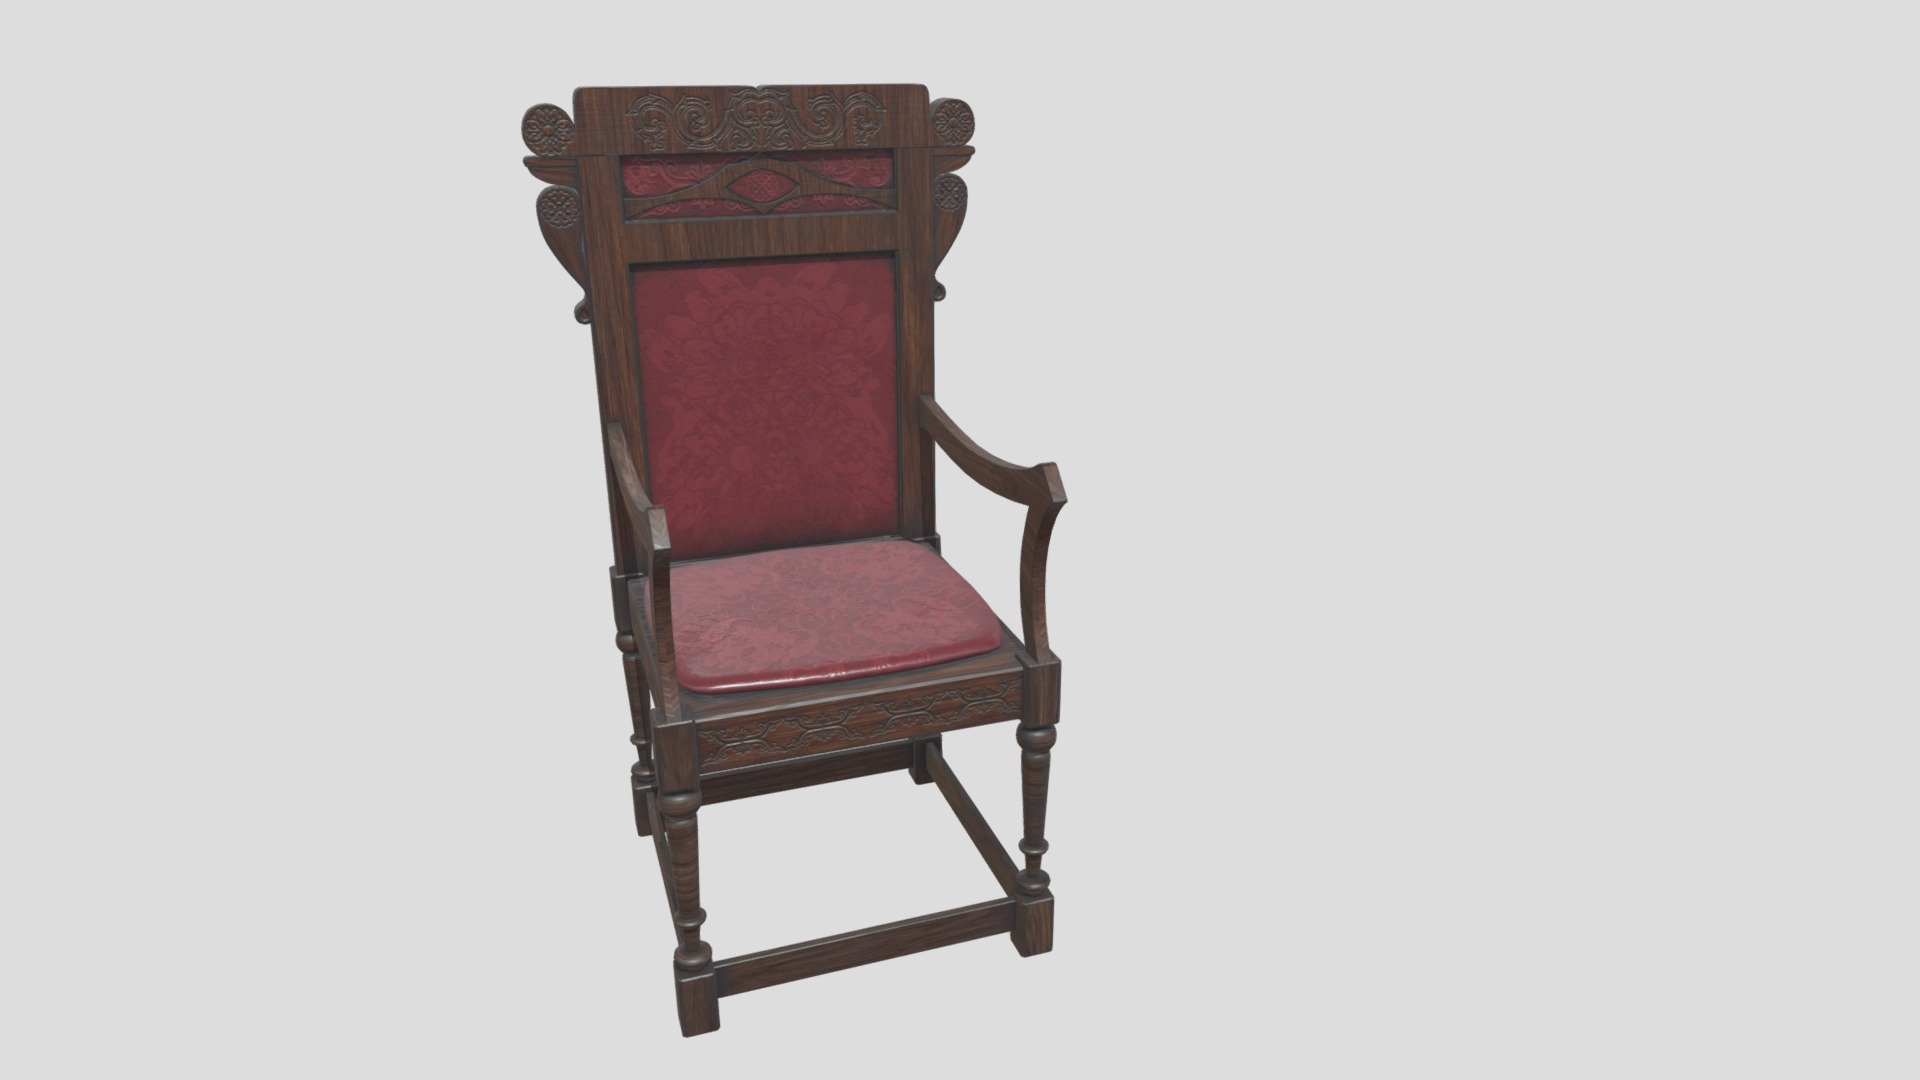 3D model Antique Western Wooden Chair - This is a 3D model of the Antique Western Wooden Chair. The 3D model is about a chair with a cushion.